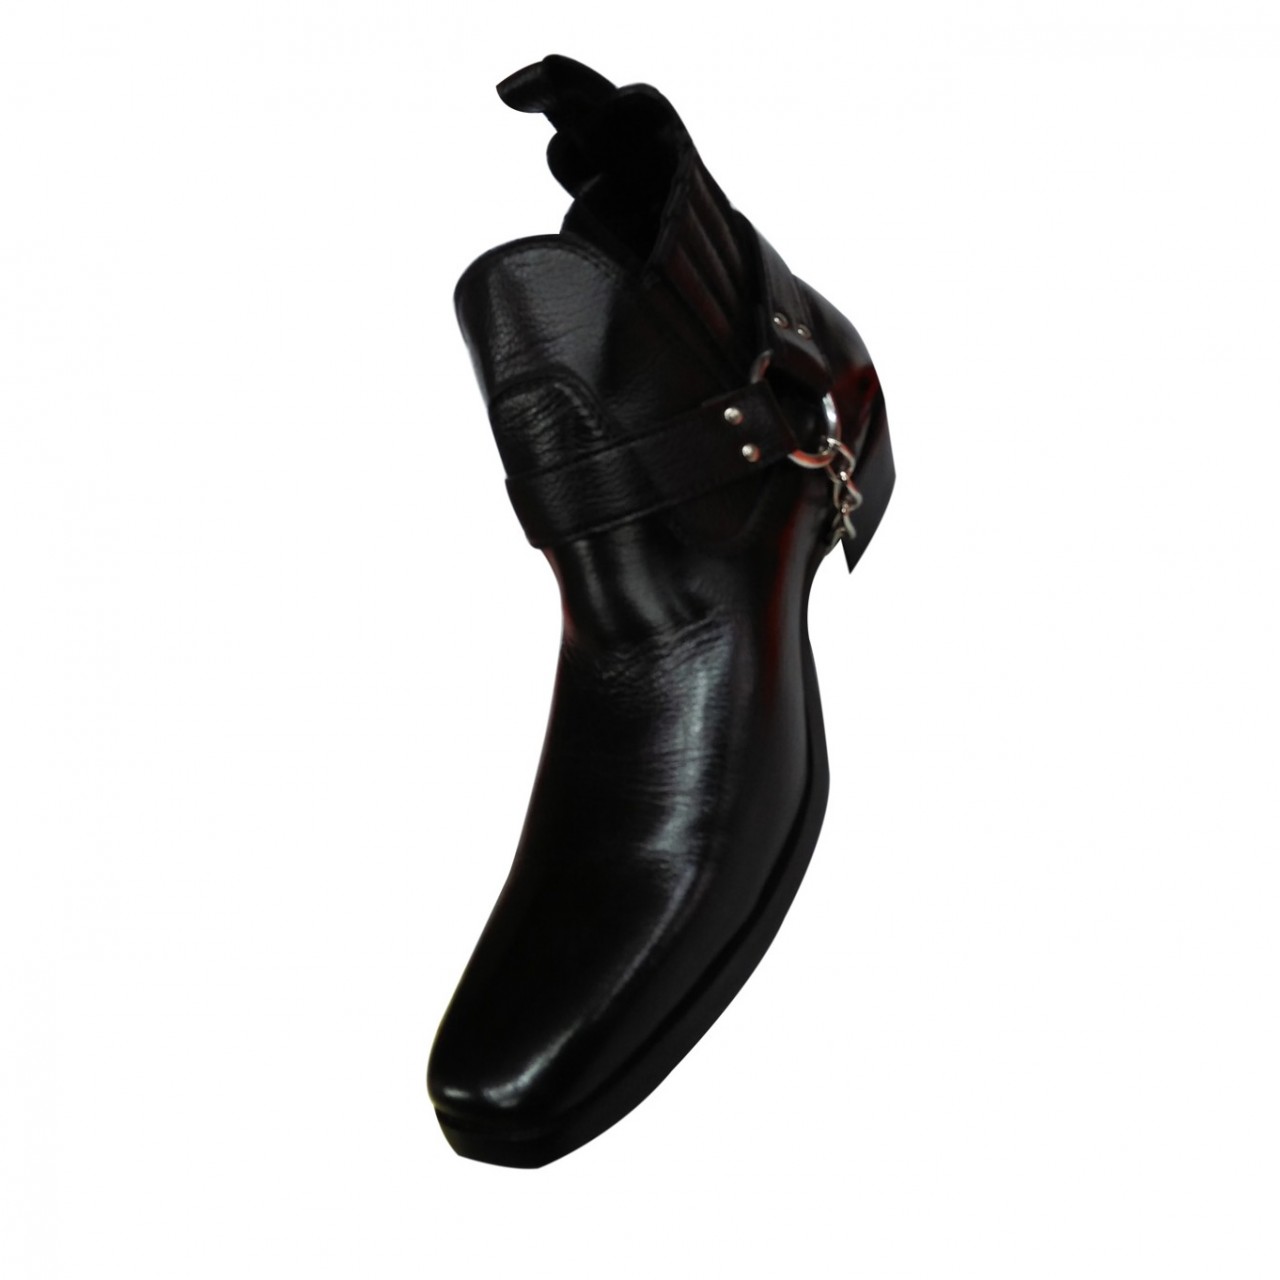 Black Leather Cowboy Boots With Metal Chain For Men - 7 To 12